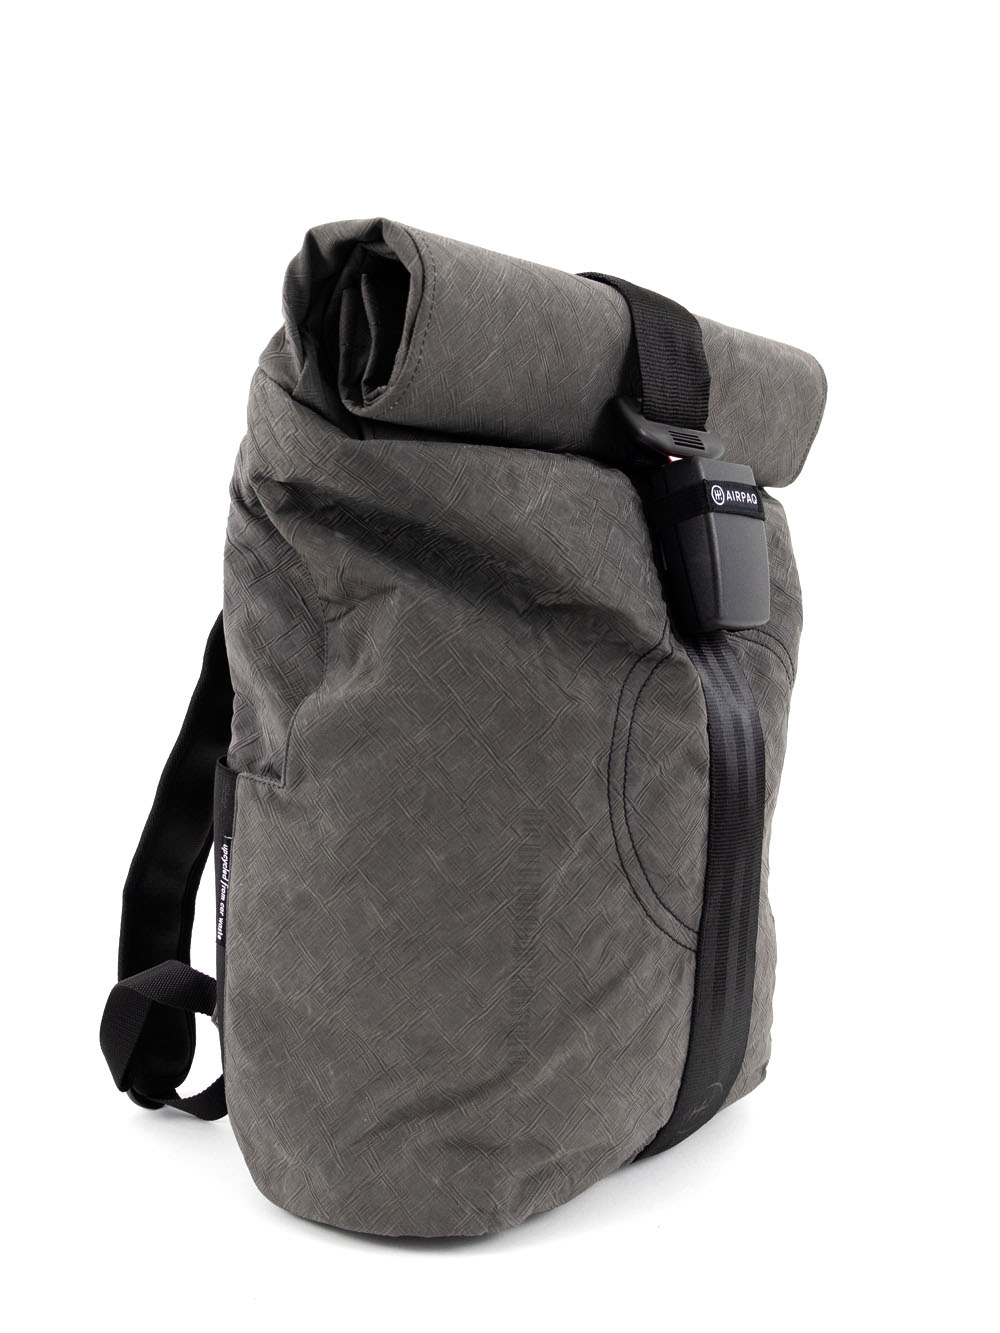 Airpaq backpack roll top - colored anthracite 